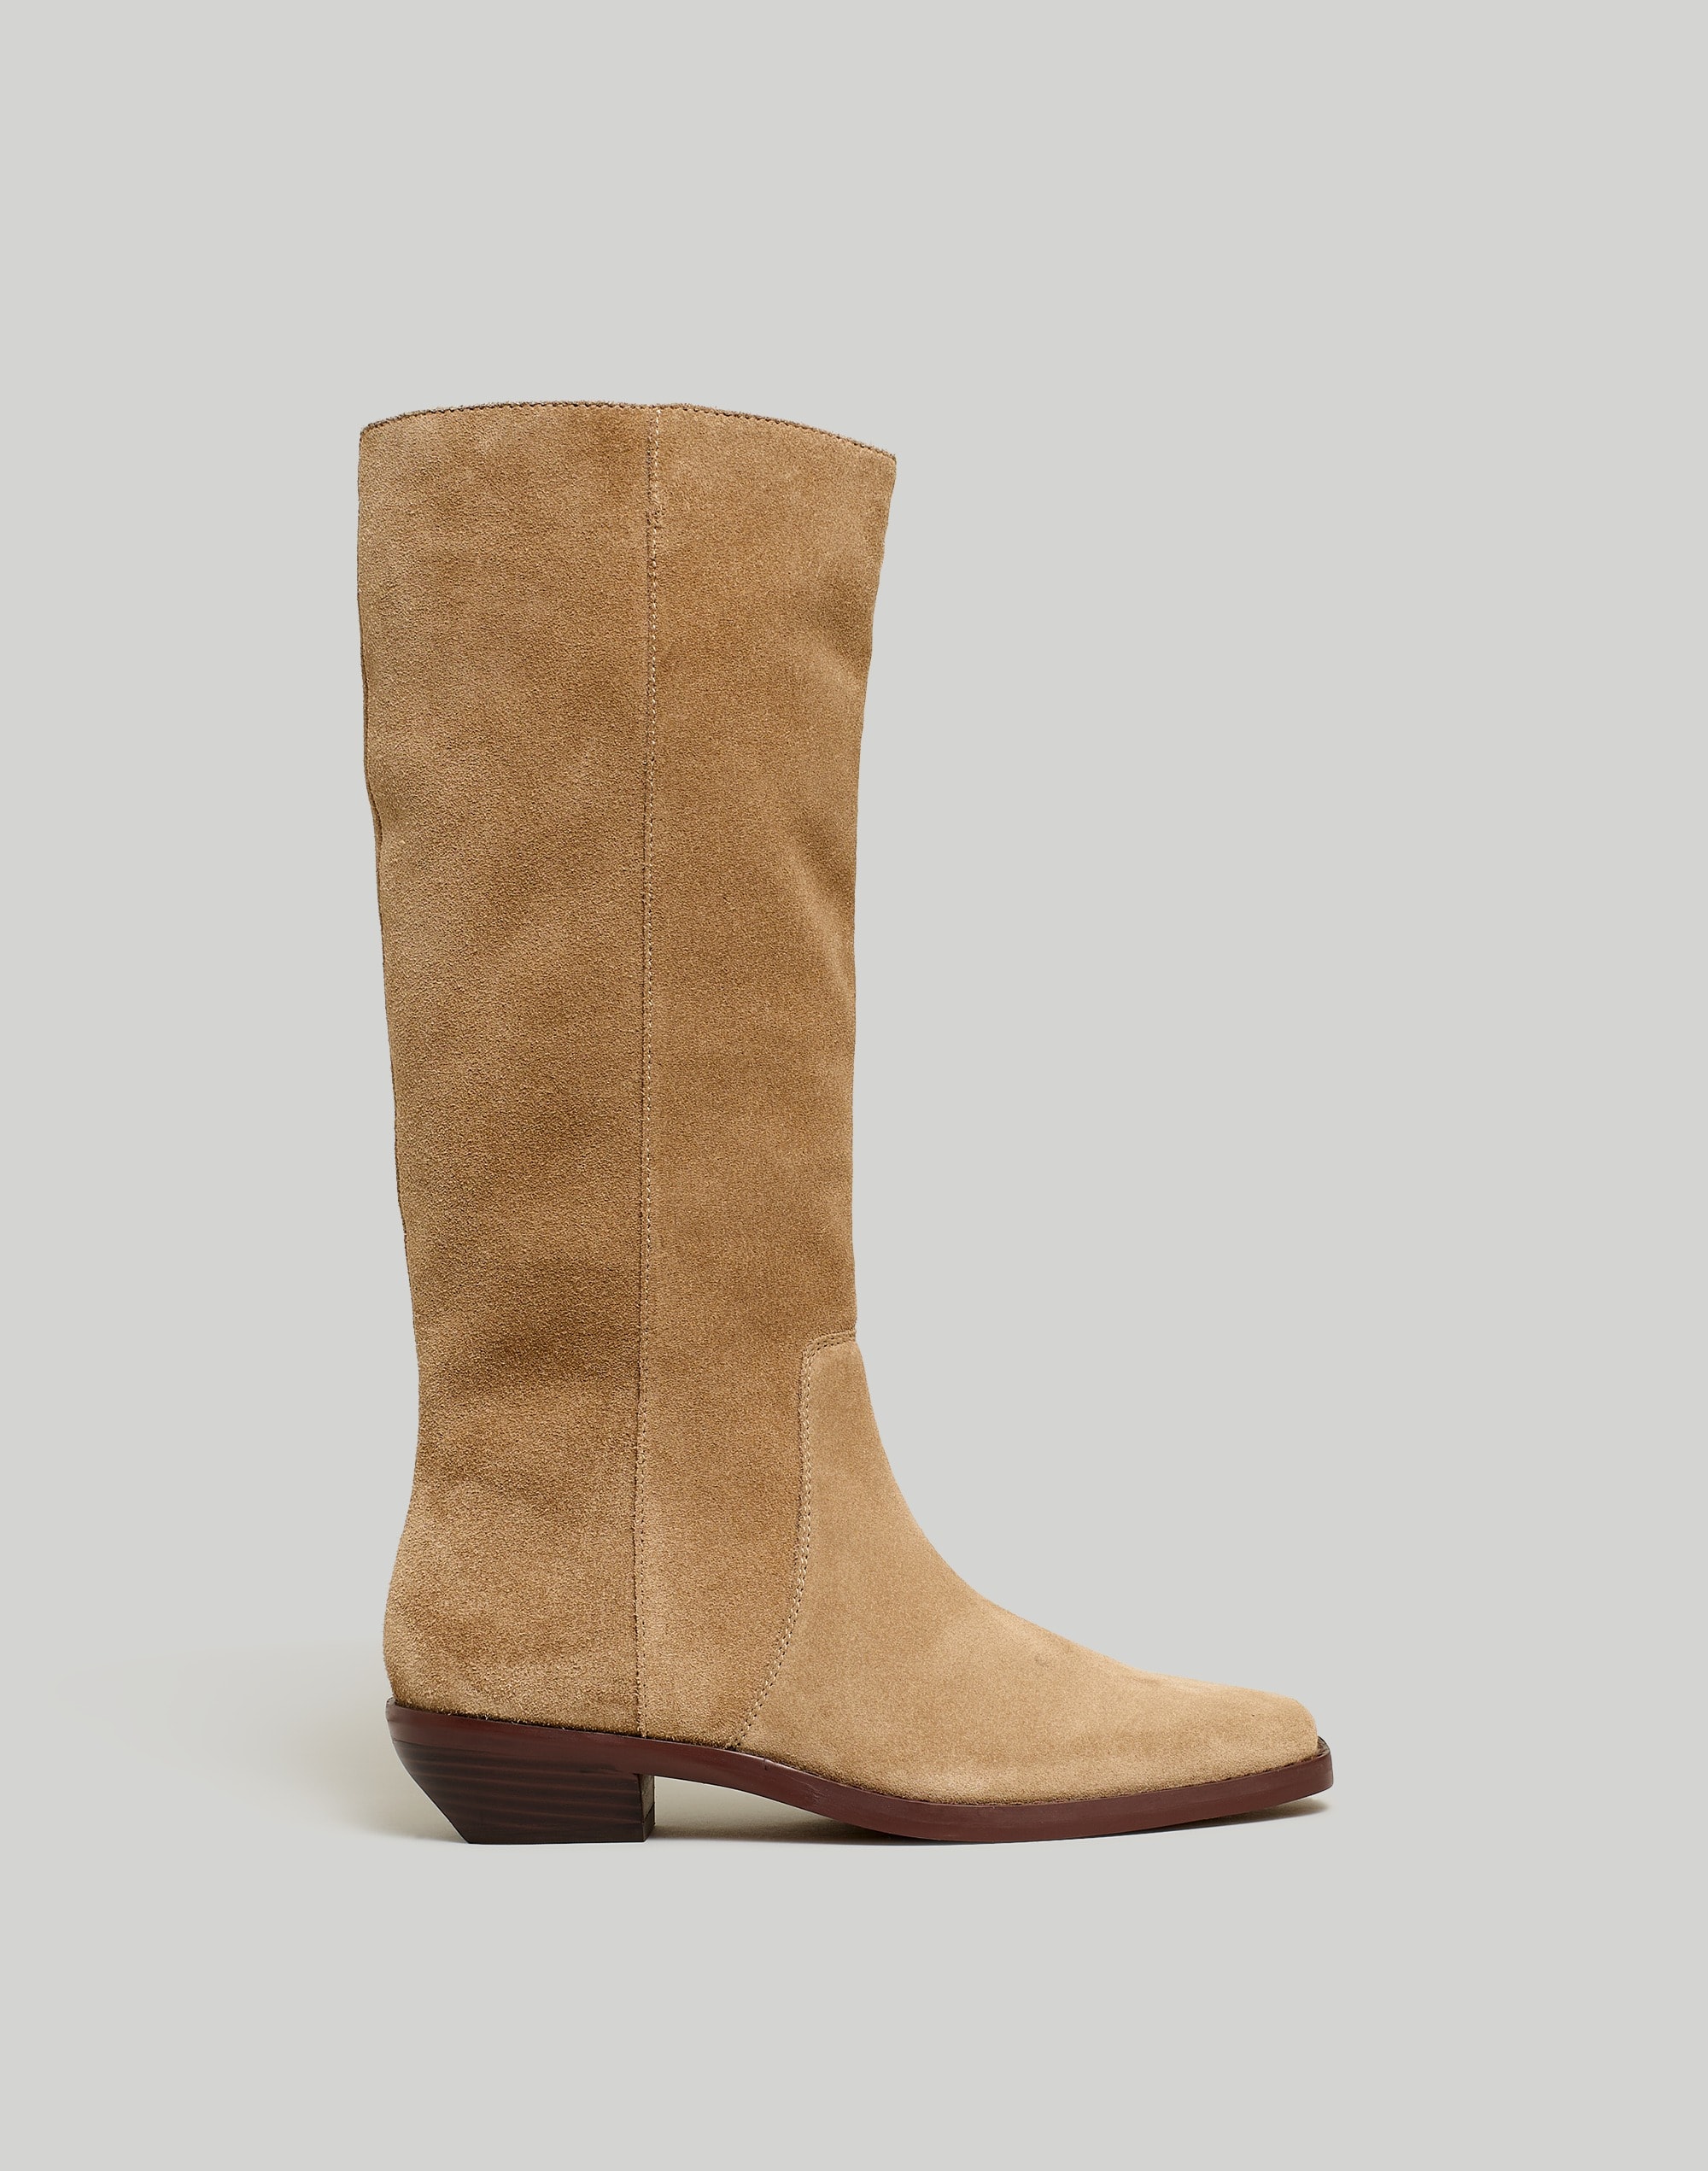 The Antoine Tall Boot Suede